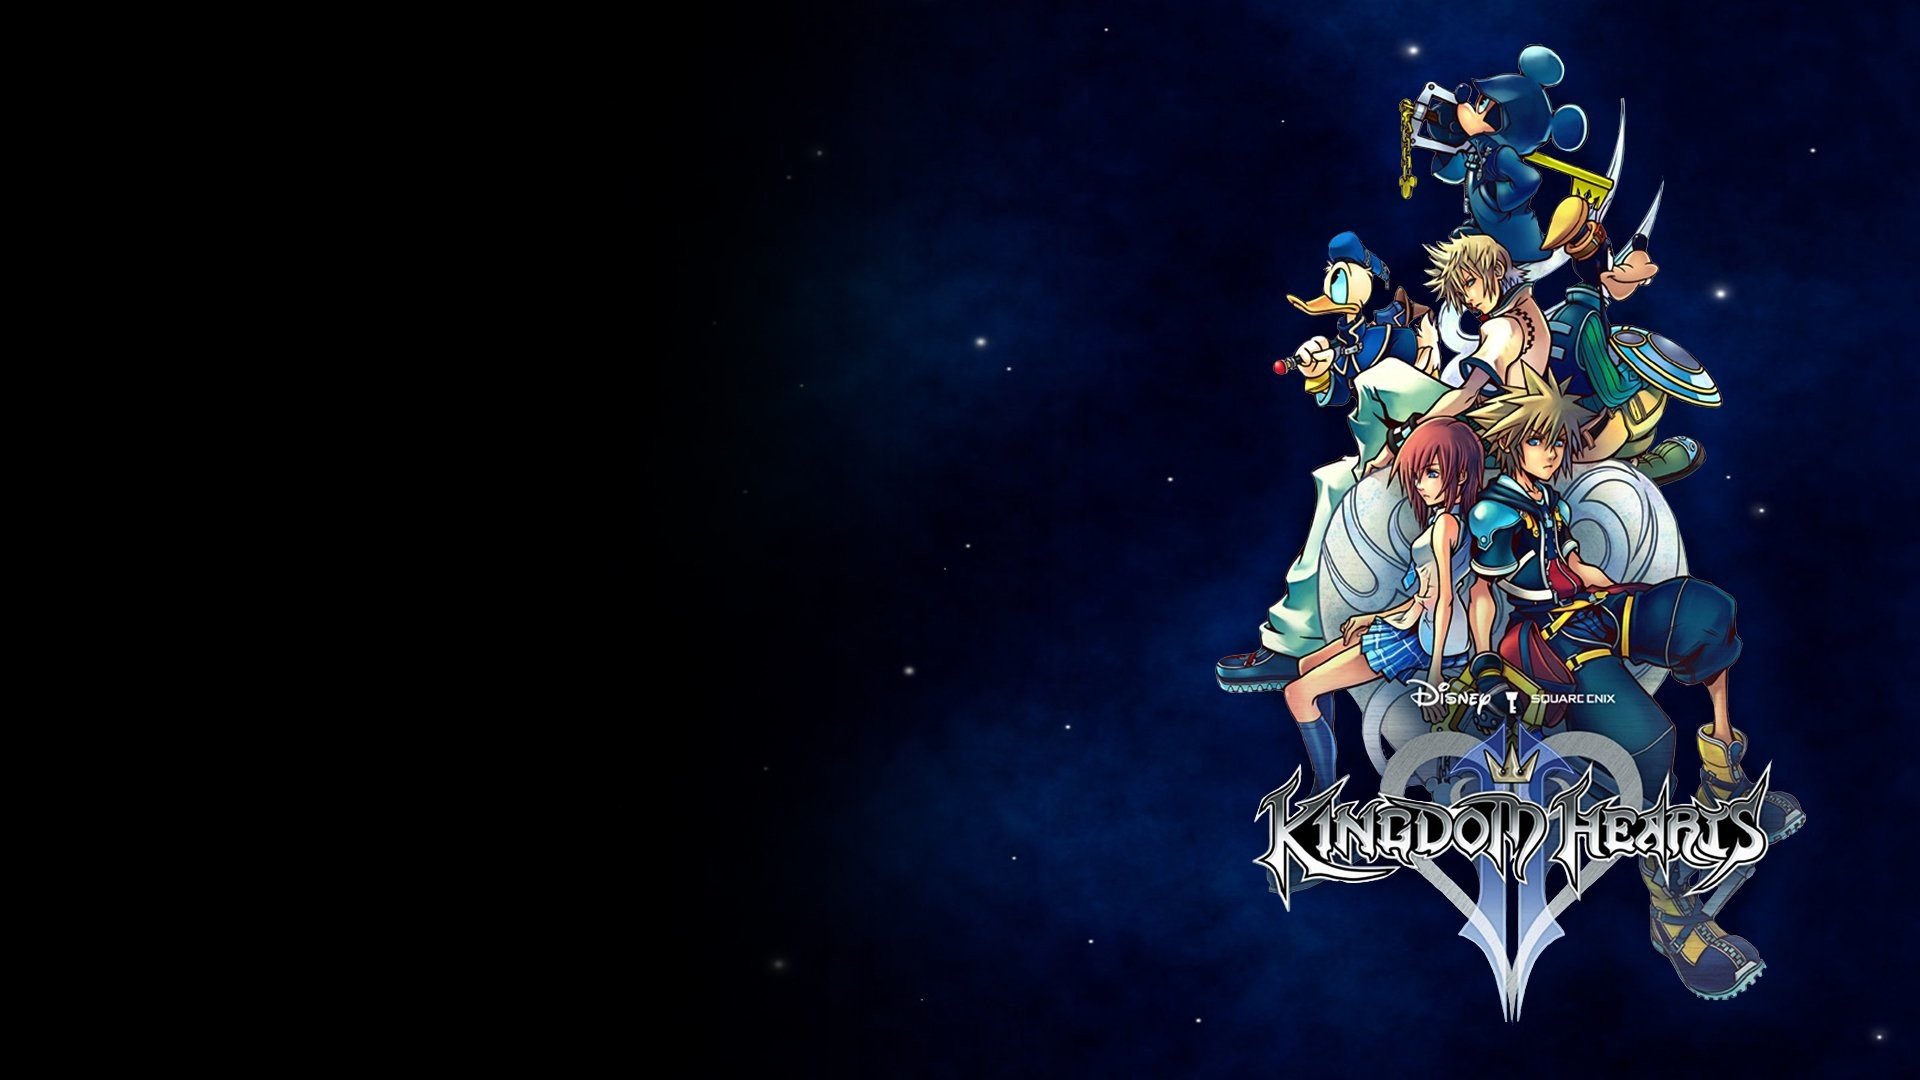 Kingdom Hearts 2 Wallpapers 68 images